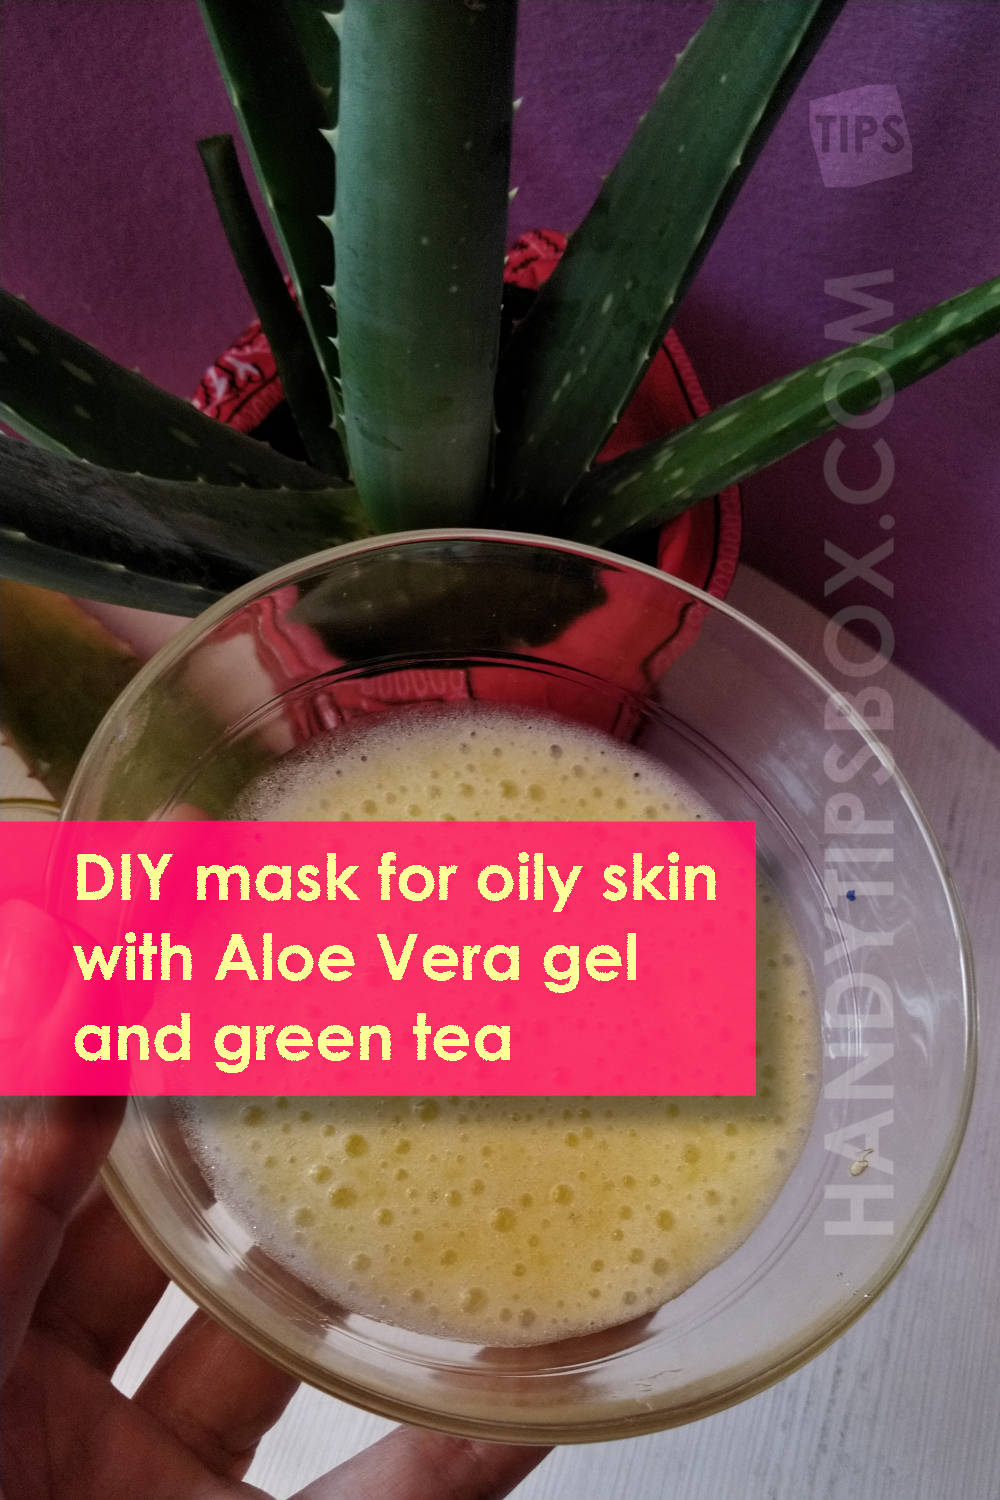 Gentle homemade mask for oily skin with Aloe Vera gel and green tea, vertical image